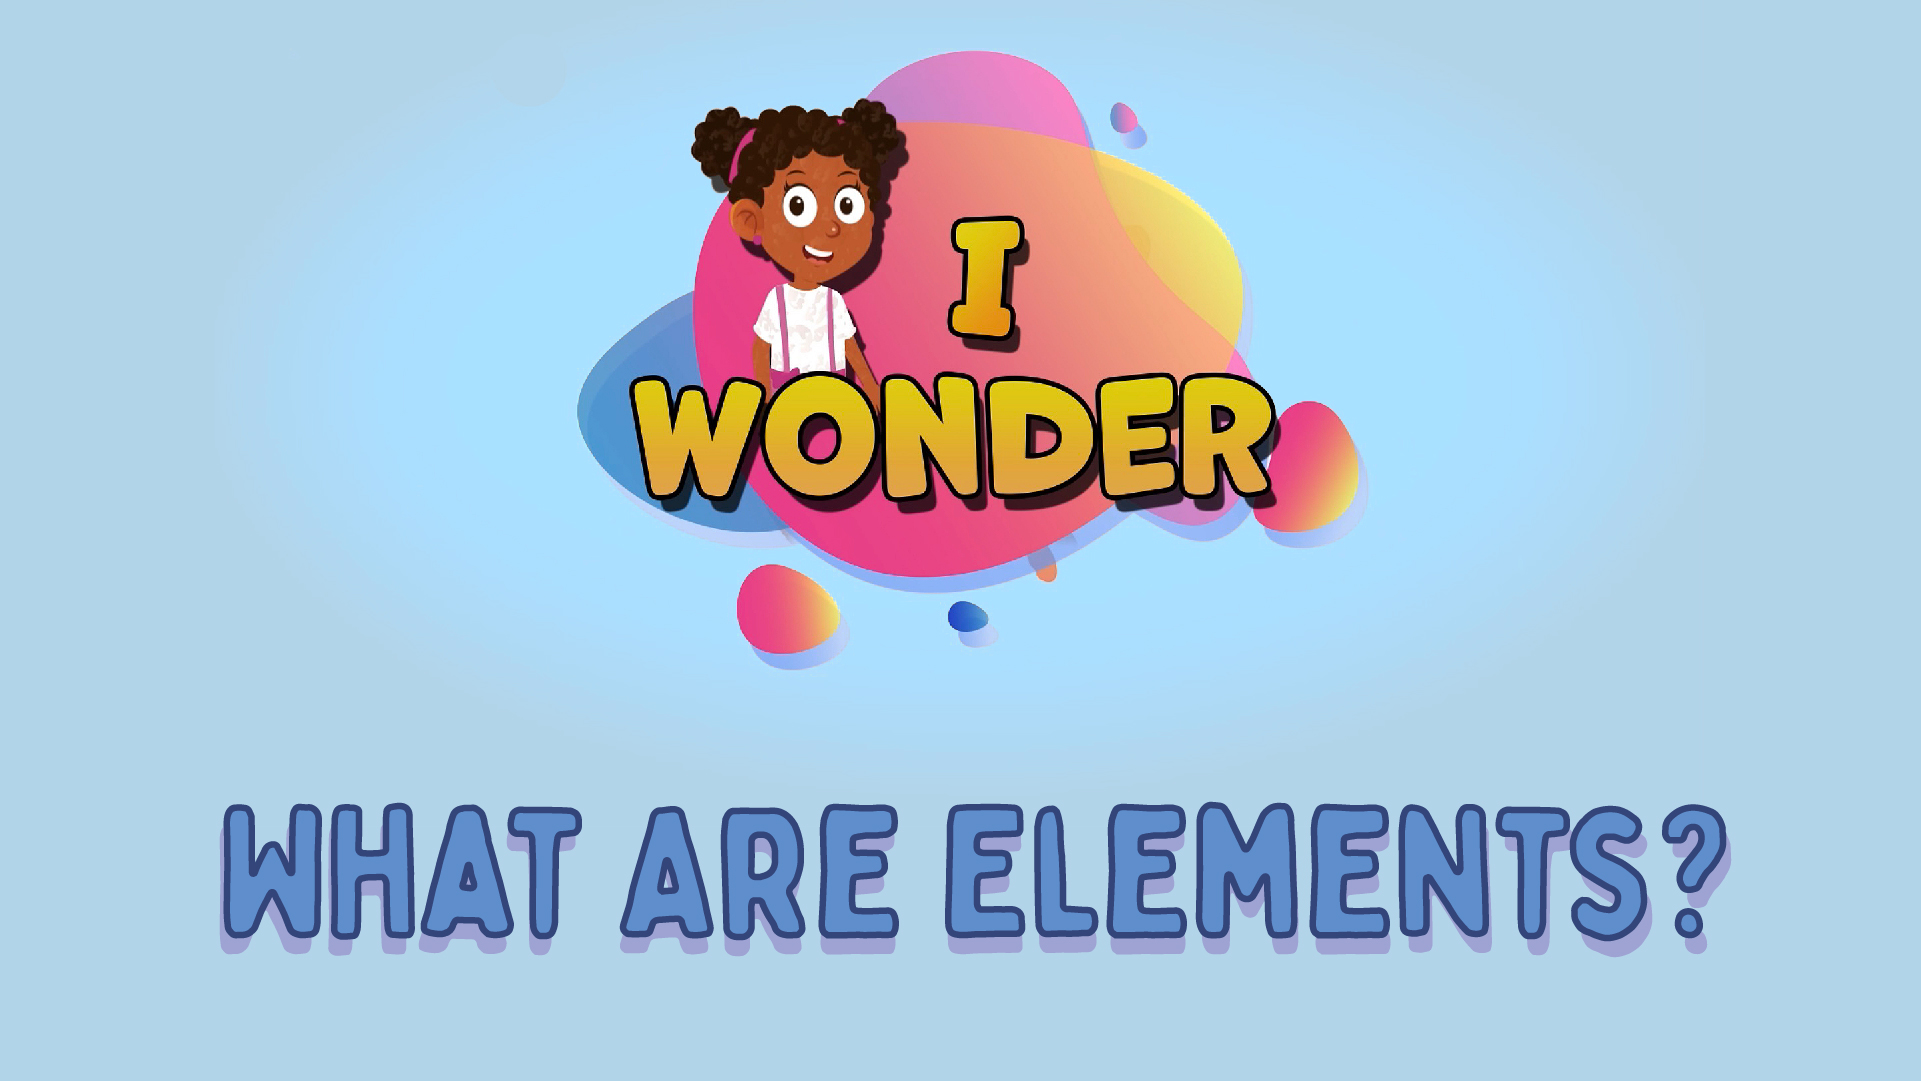 What Are Elements?